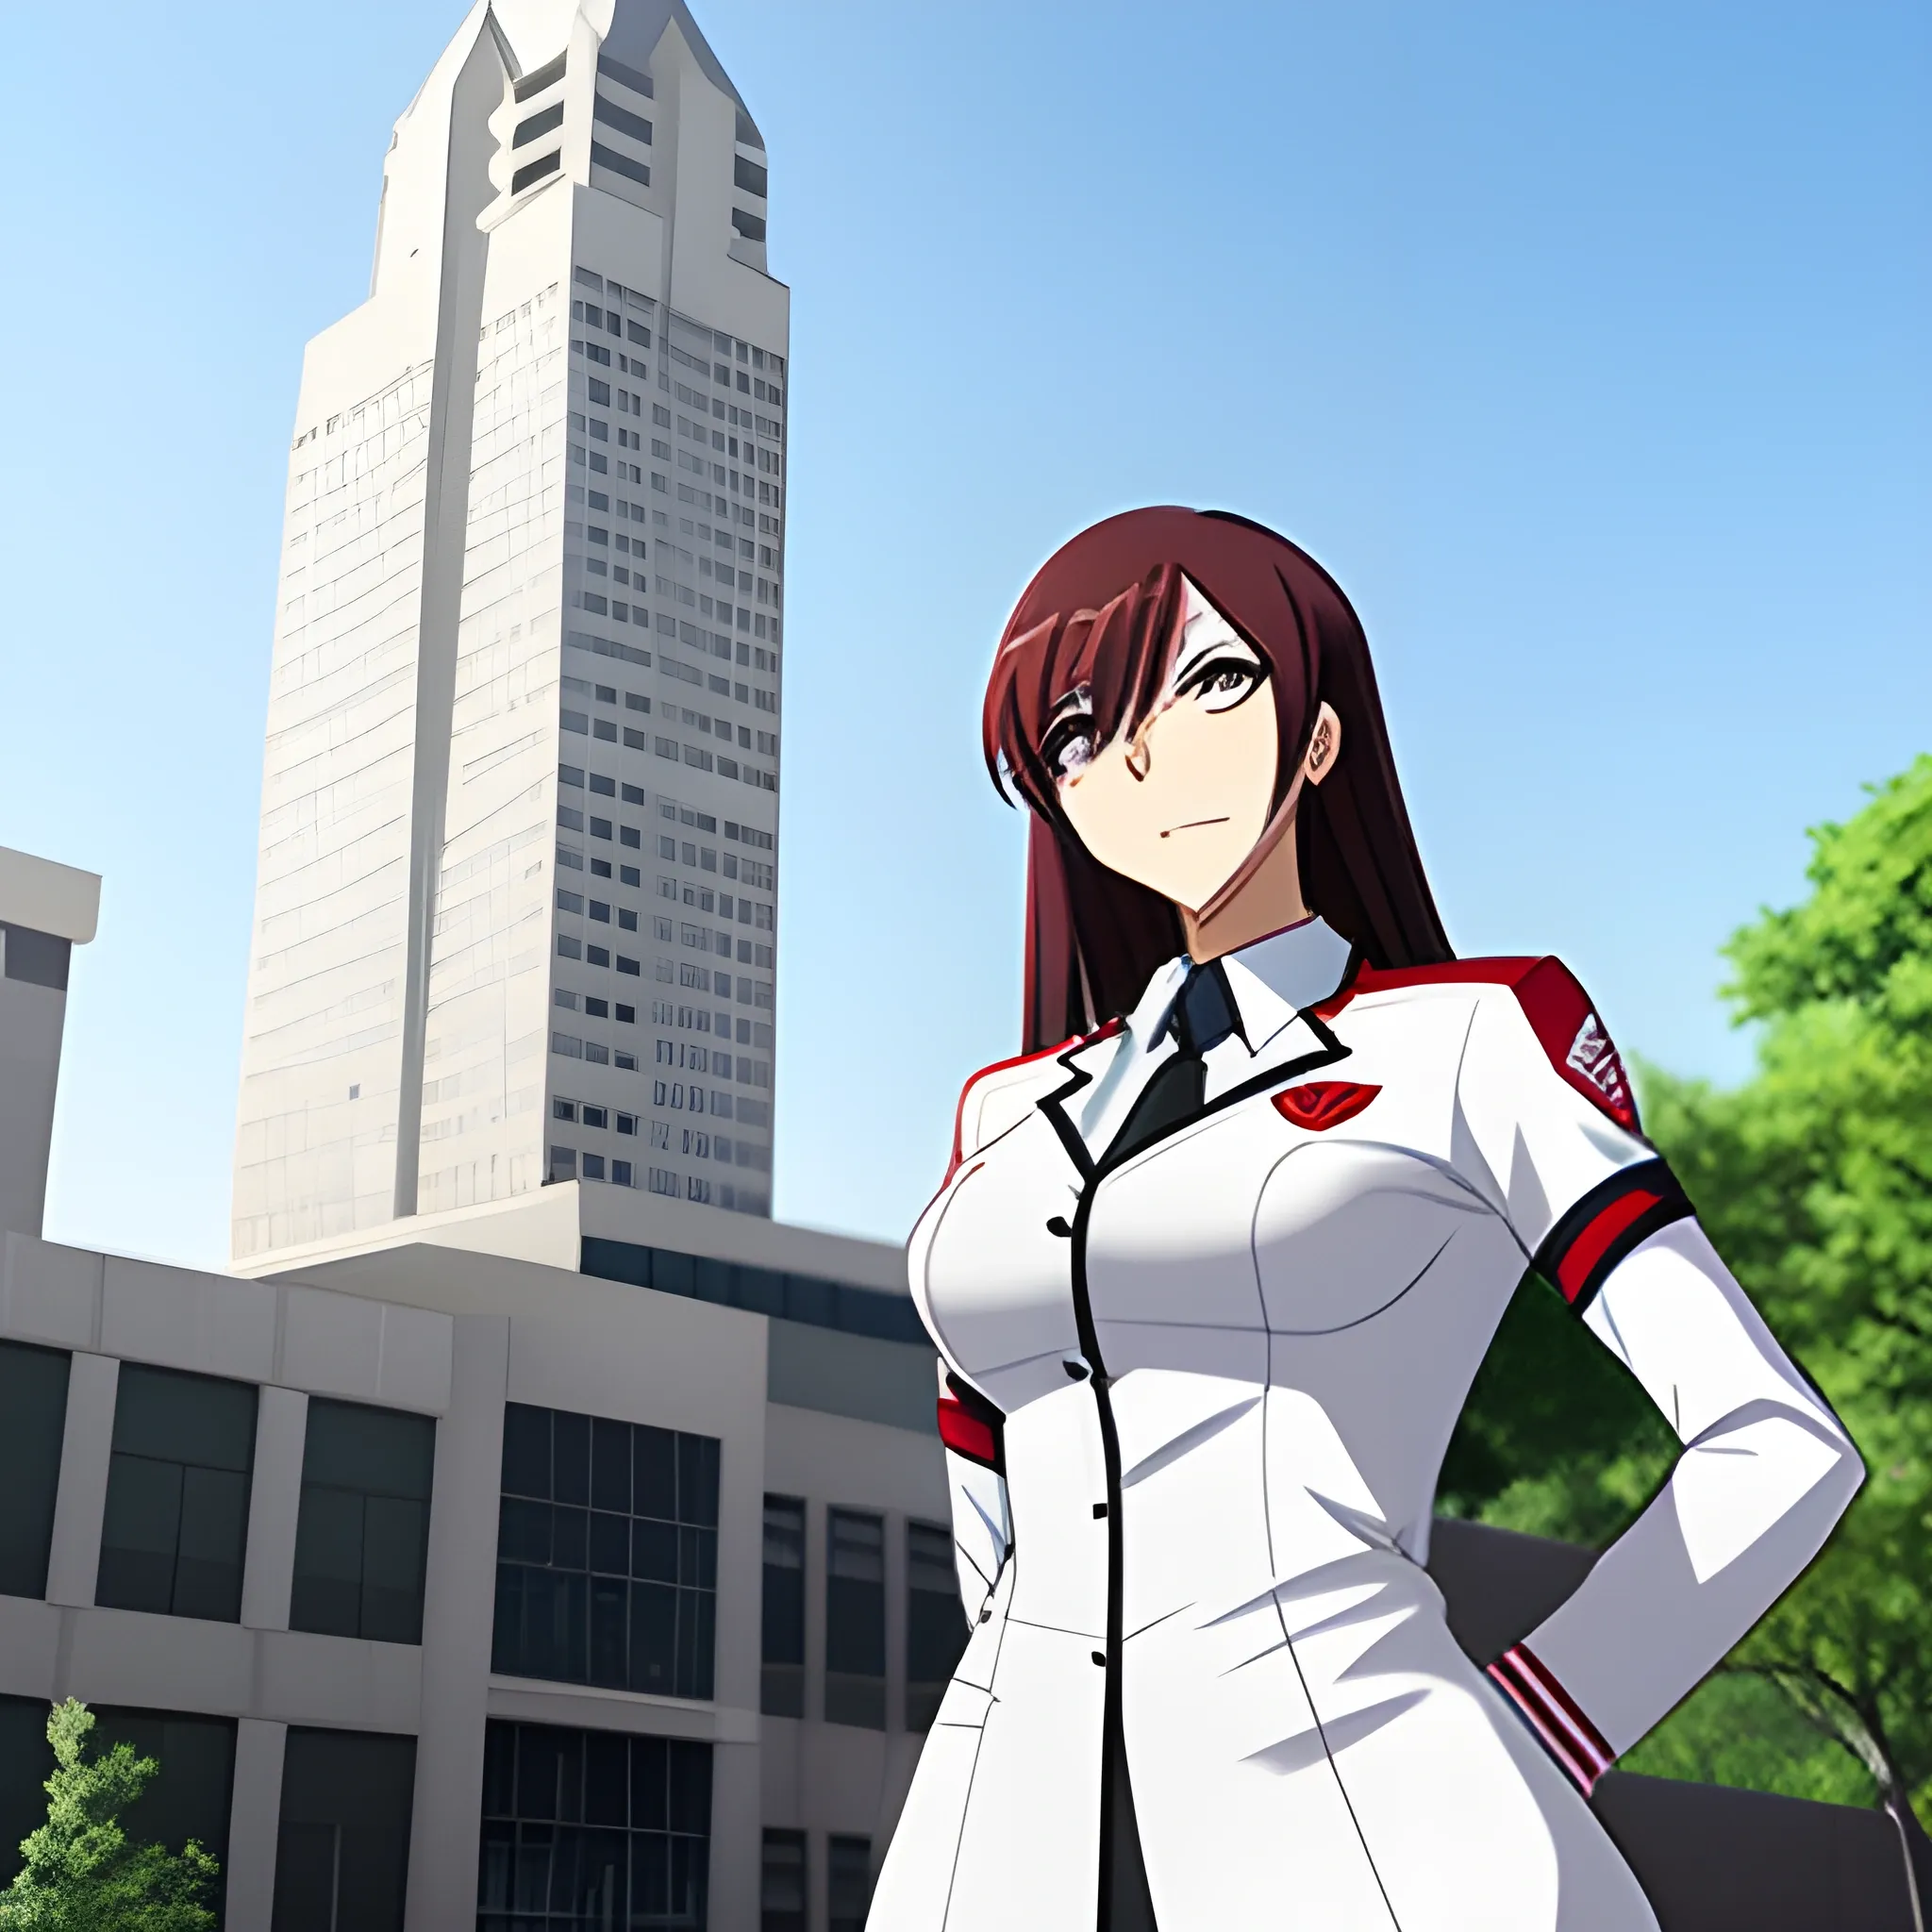 A fierce anime school girl stands tall in her crisp, white uniform, ready to take on any challenge that comes her way in the chaotic classroom setting